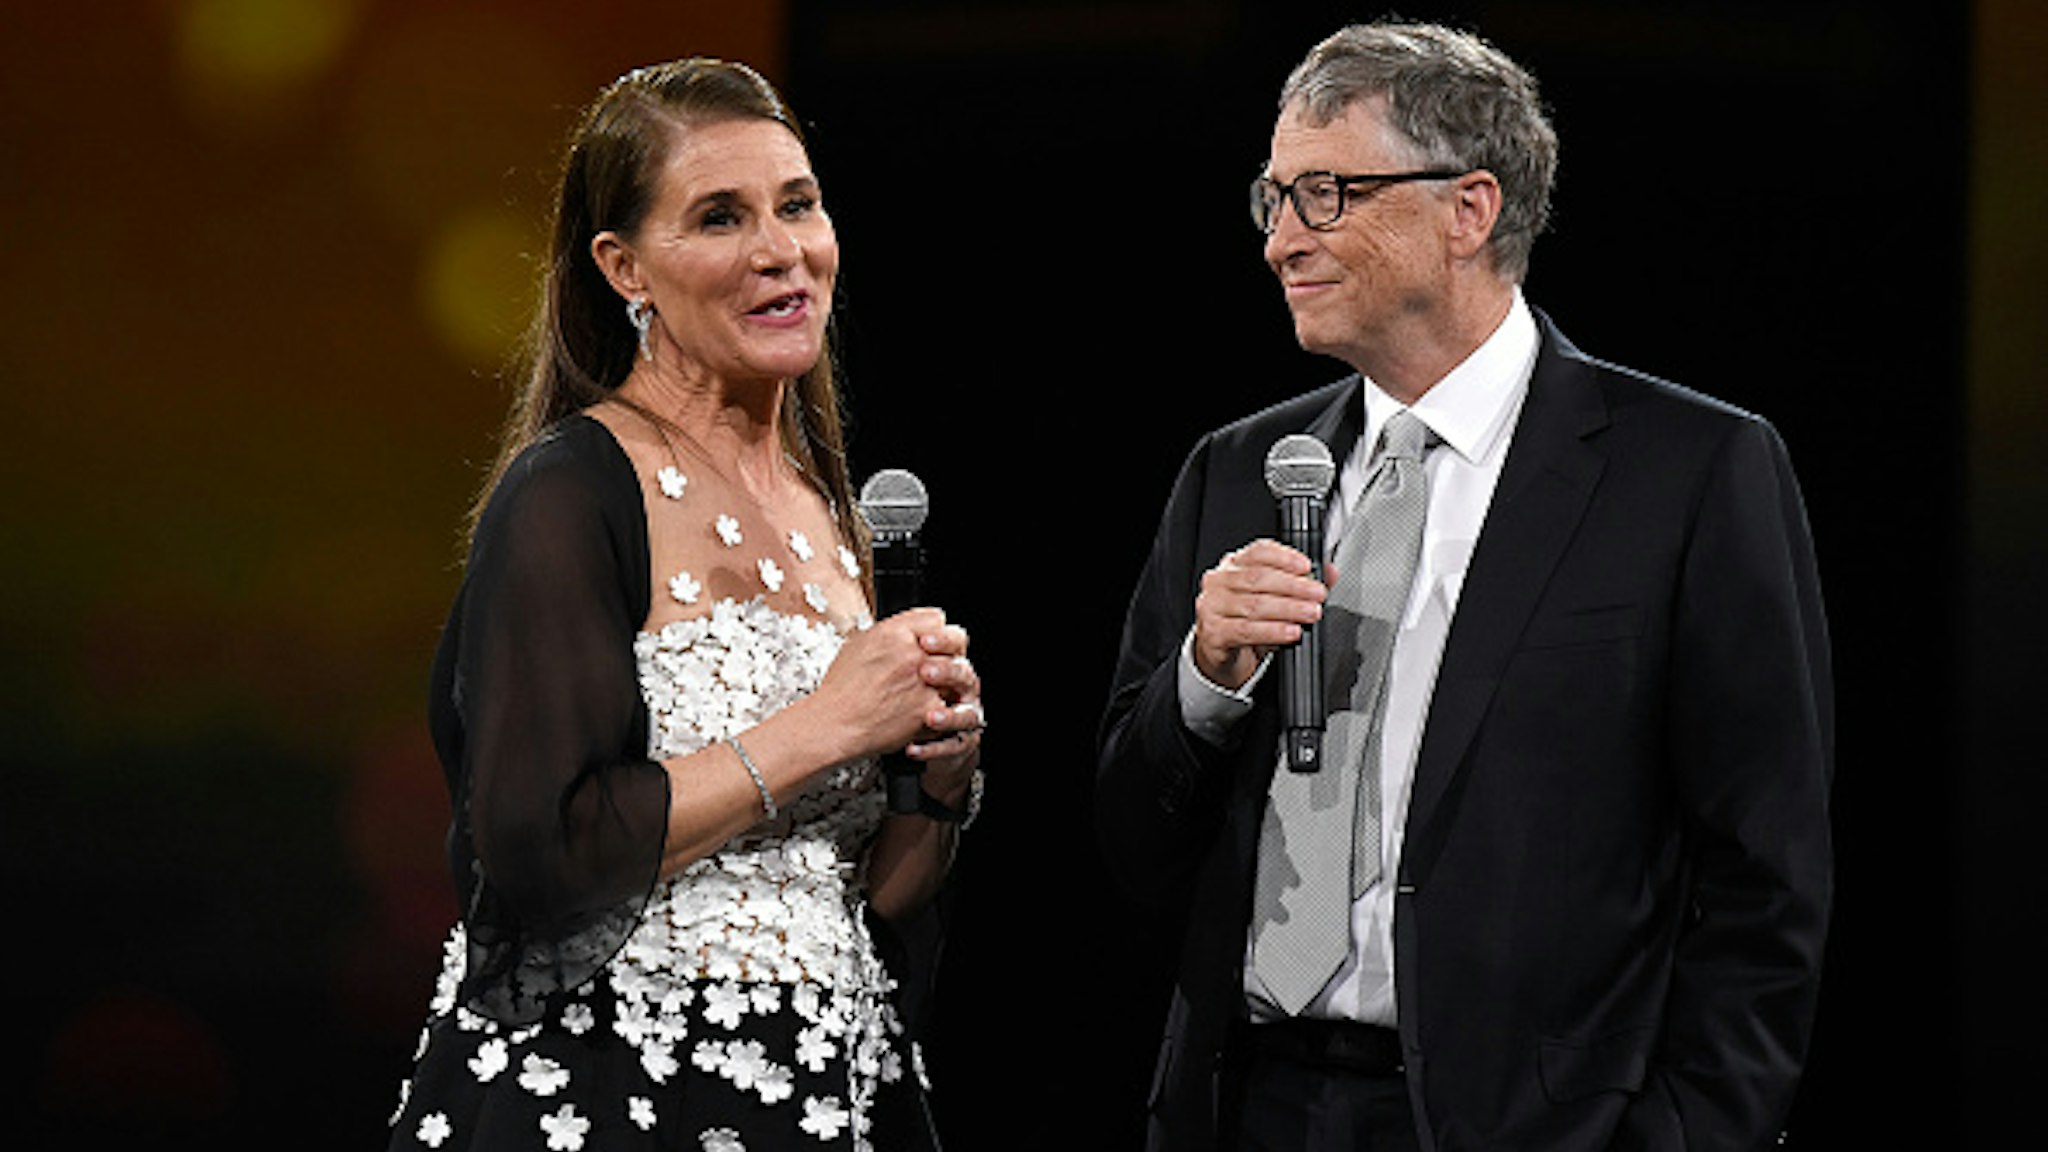 NEW YORK, NY - MAY 14: Melinda Gates and Bill Gates speak on stage during The Robin Hood Foundation's 2018 benefit at Jacob Javitz Center on May 14, 2018 in New York City.